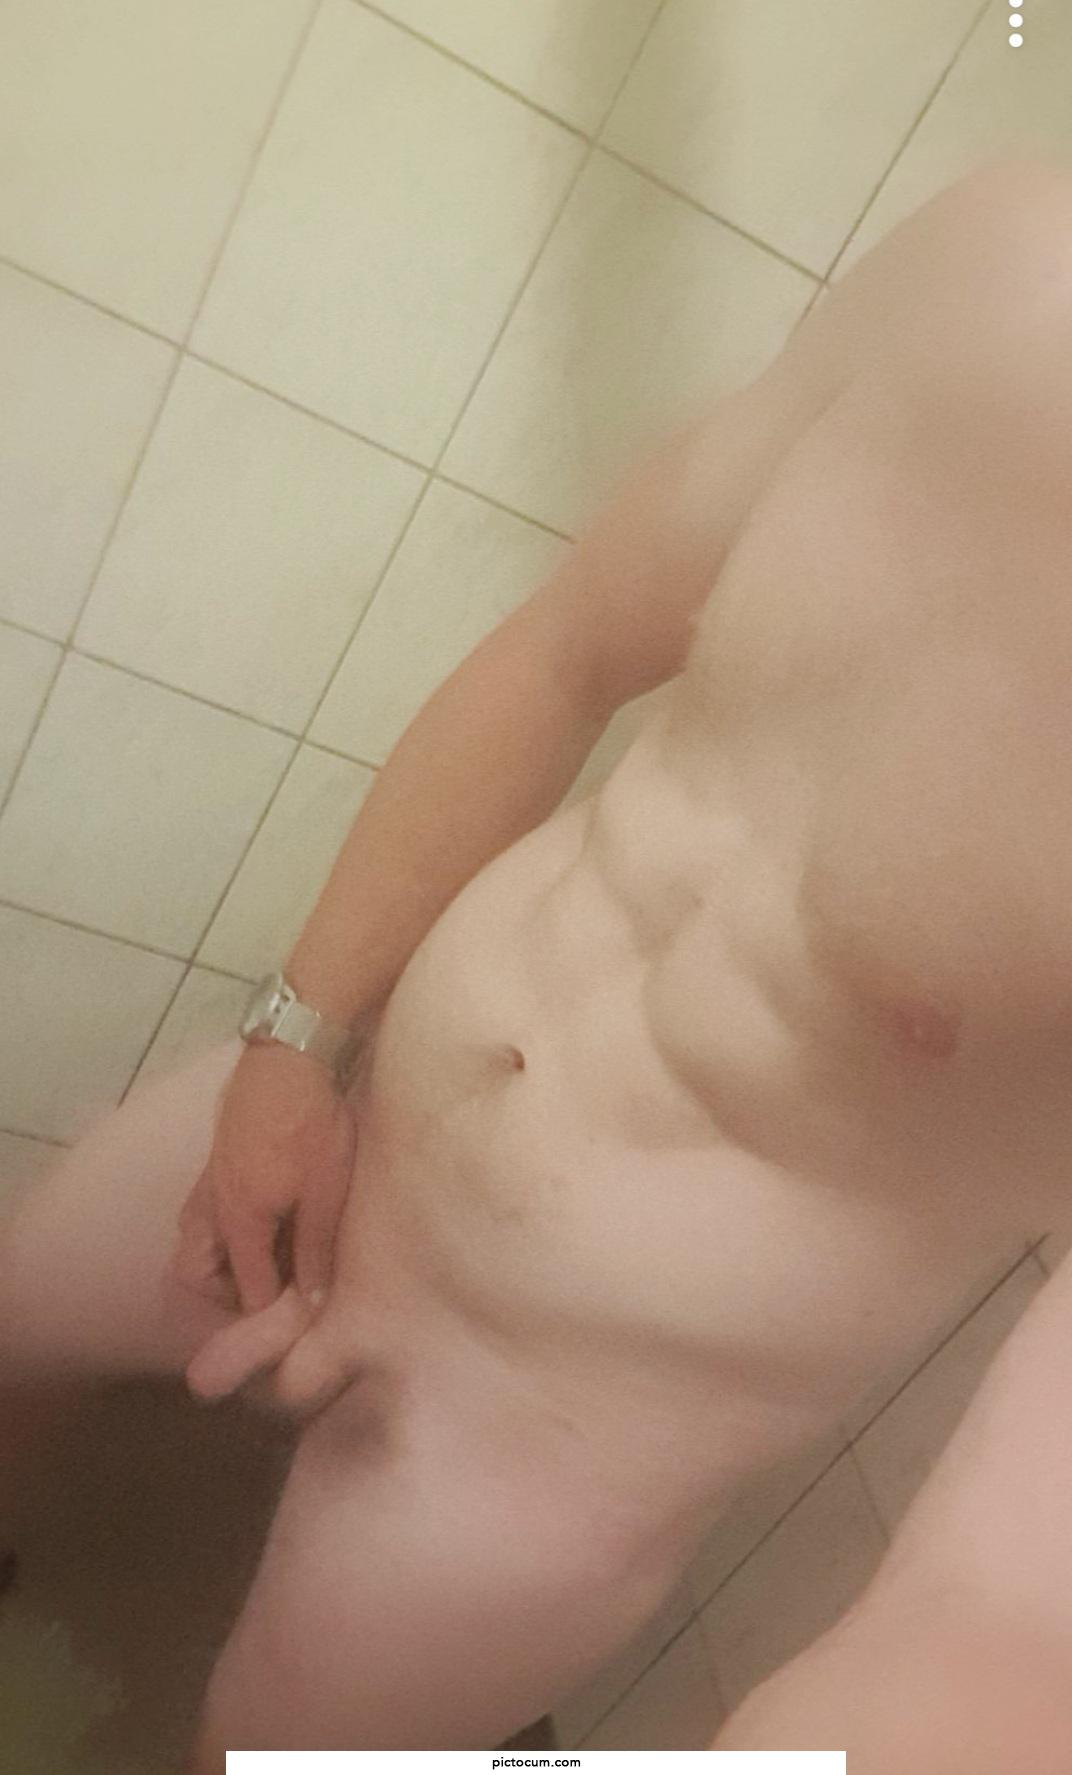  14st 6ft 25A bit pathetic but I can only try